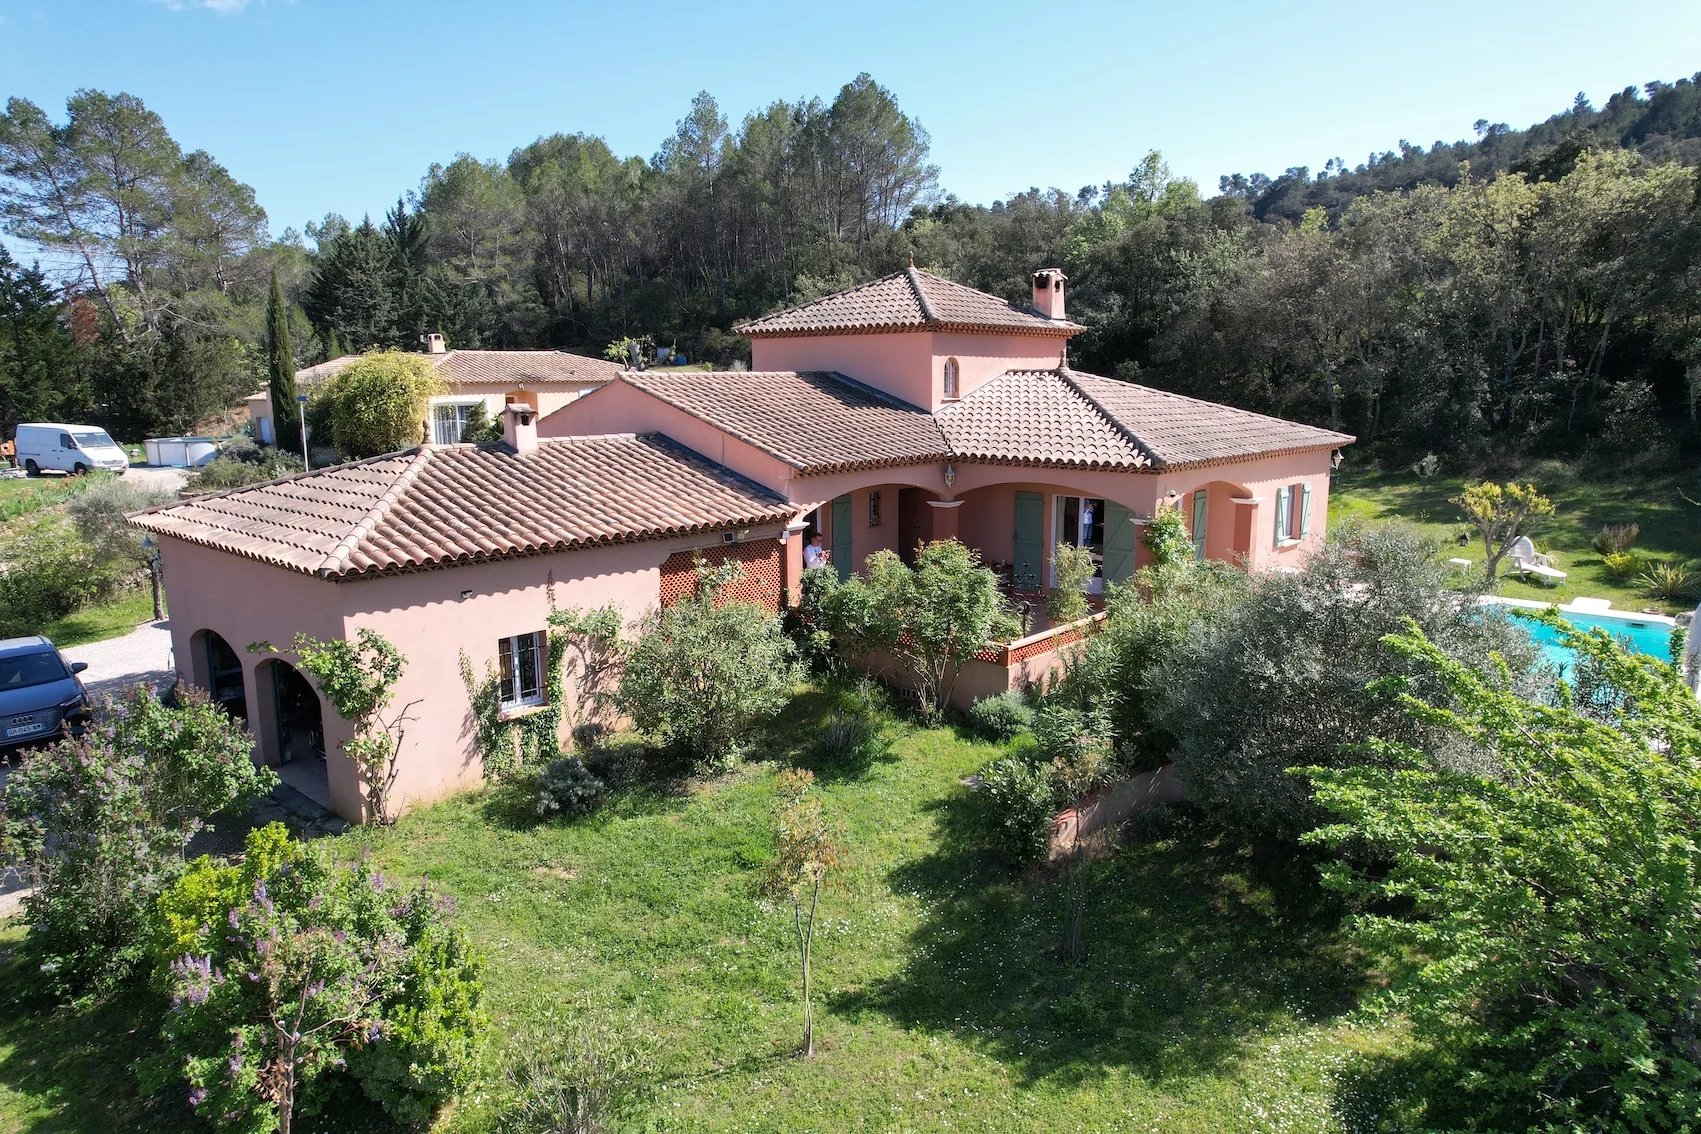 HOUSE - 20 MINUTES FROM COTIGNAC